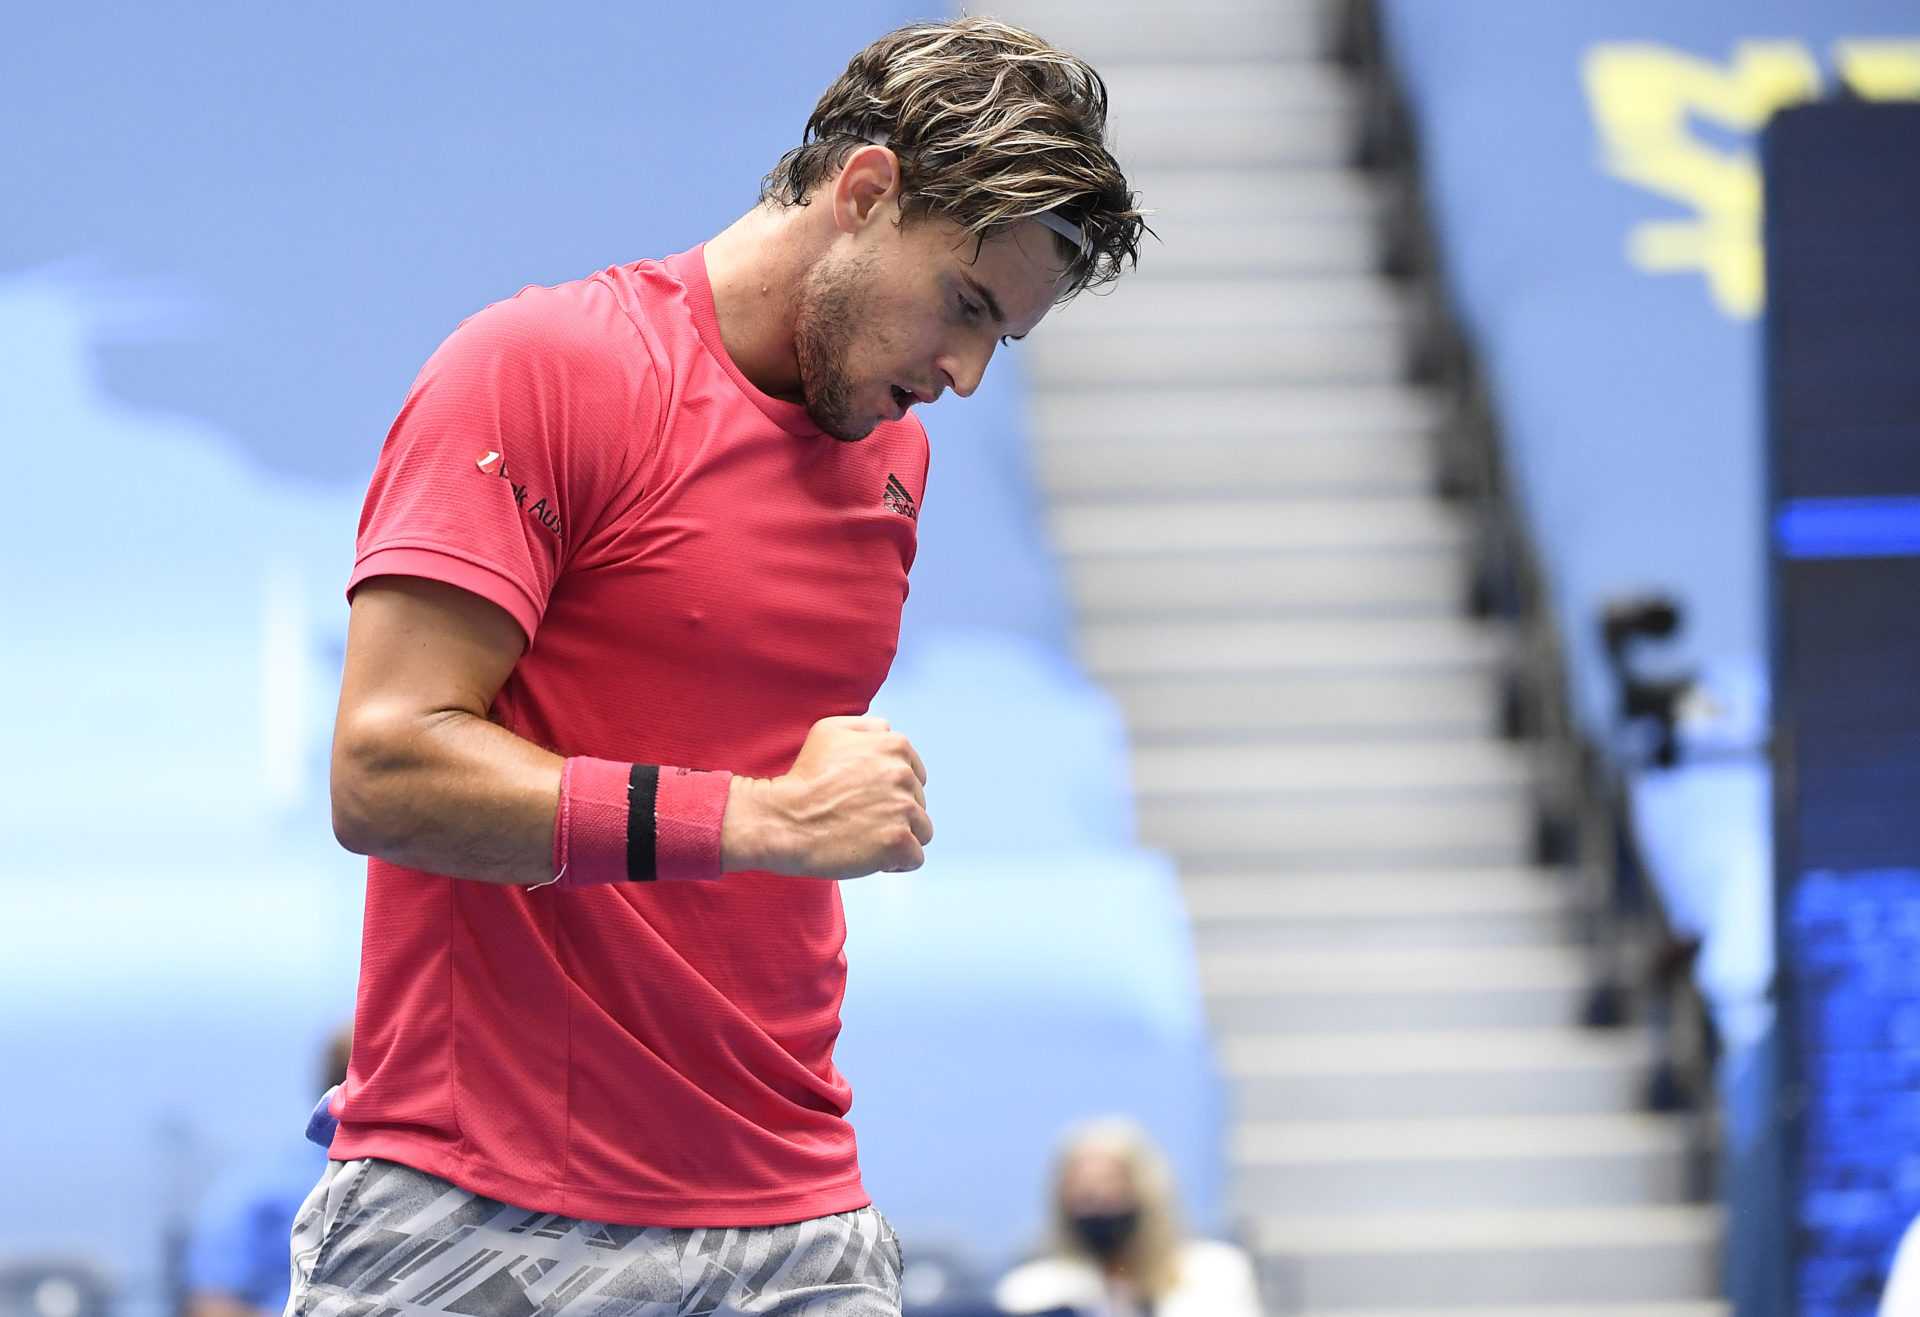 Dominic Thiem Says Past Grand Slam Experiences ‘Didn’t Help’ Him to Win US Open 2020